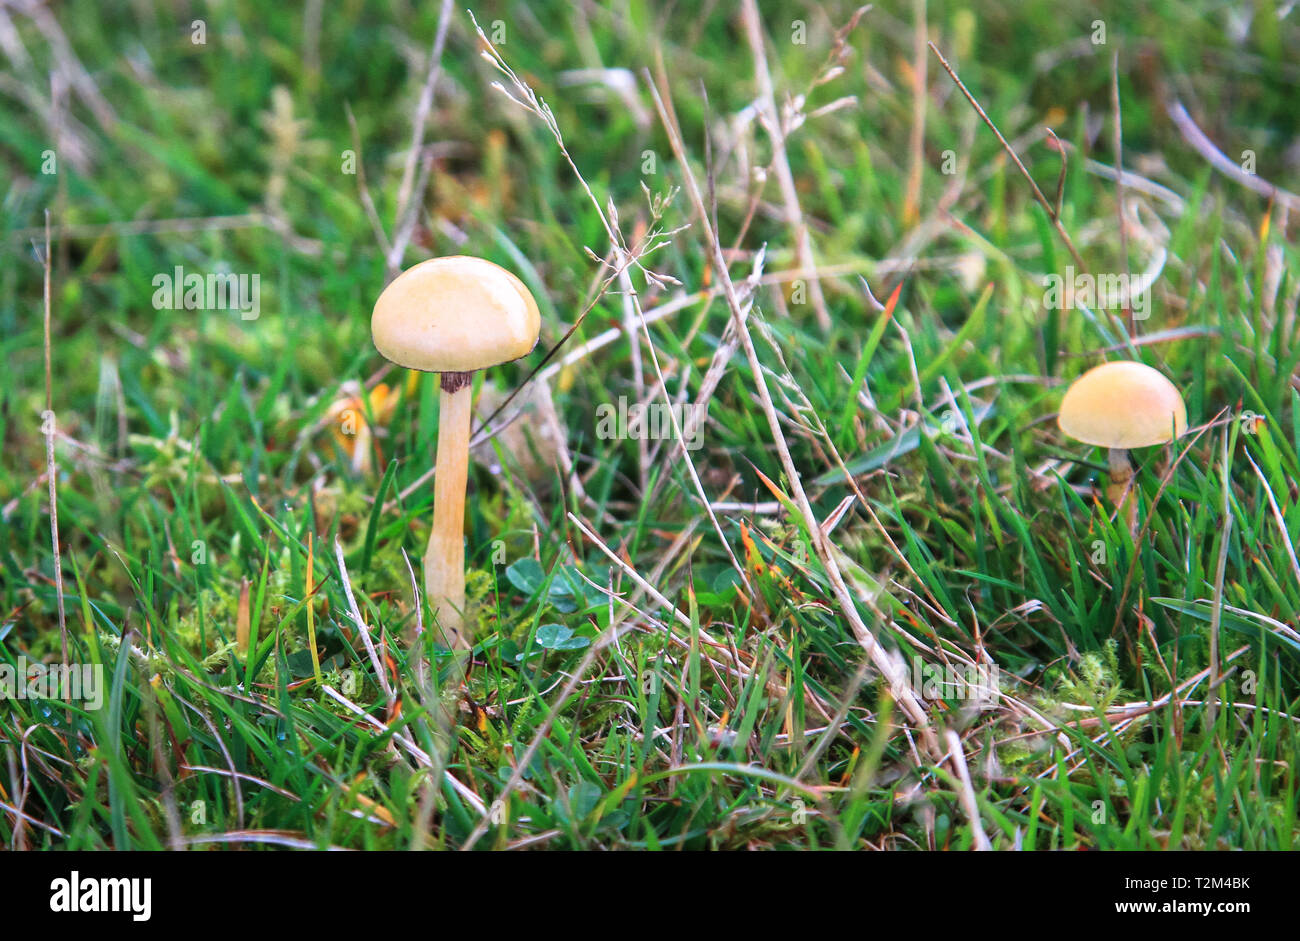 A pair of dung roundhead mushrooms (Protostropharia semiglobata) growing in a grassy field used for sheep grazing in Shropshire, England. Stock Photo